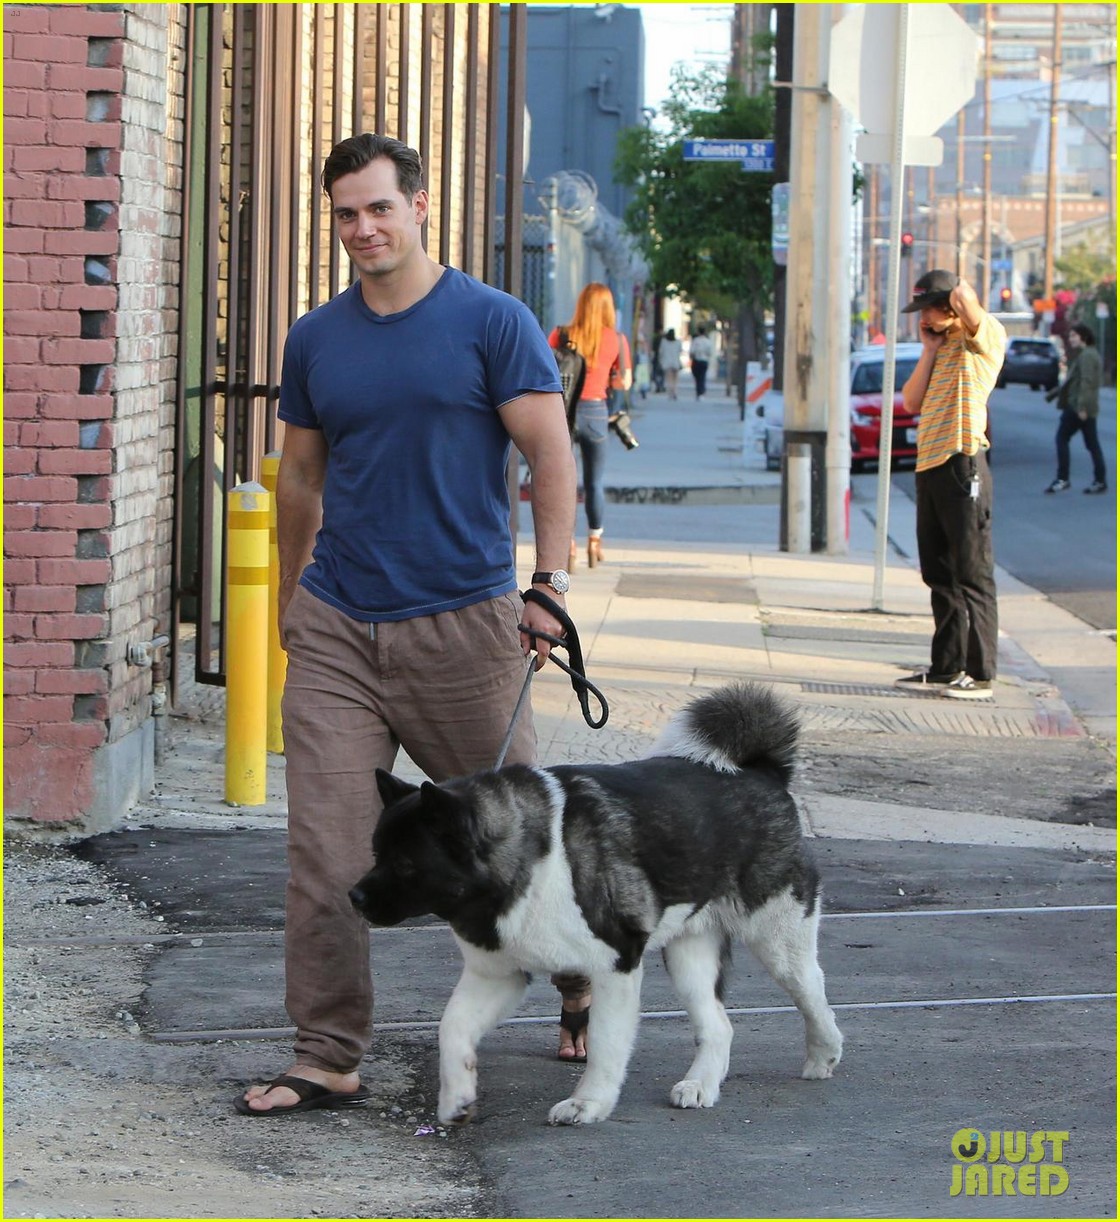 Henry Cavill Shows Off Buff Biceps Taking His Dog for a Walk!: Photo  4073793 | Henry Cavill Photos | Just Jared: Entertainment News